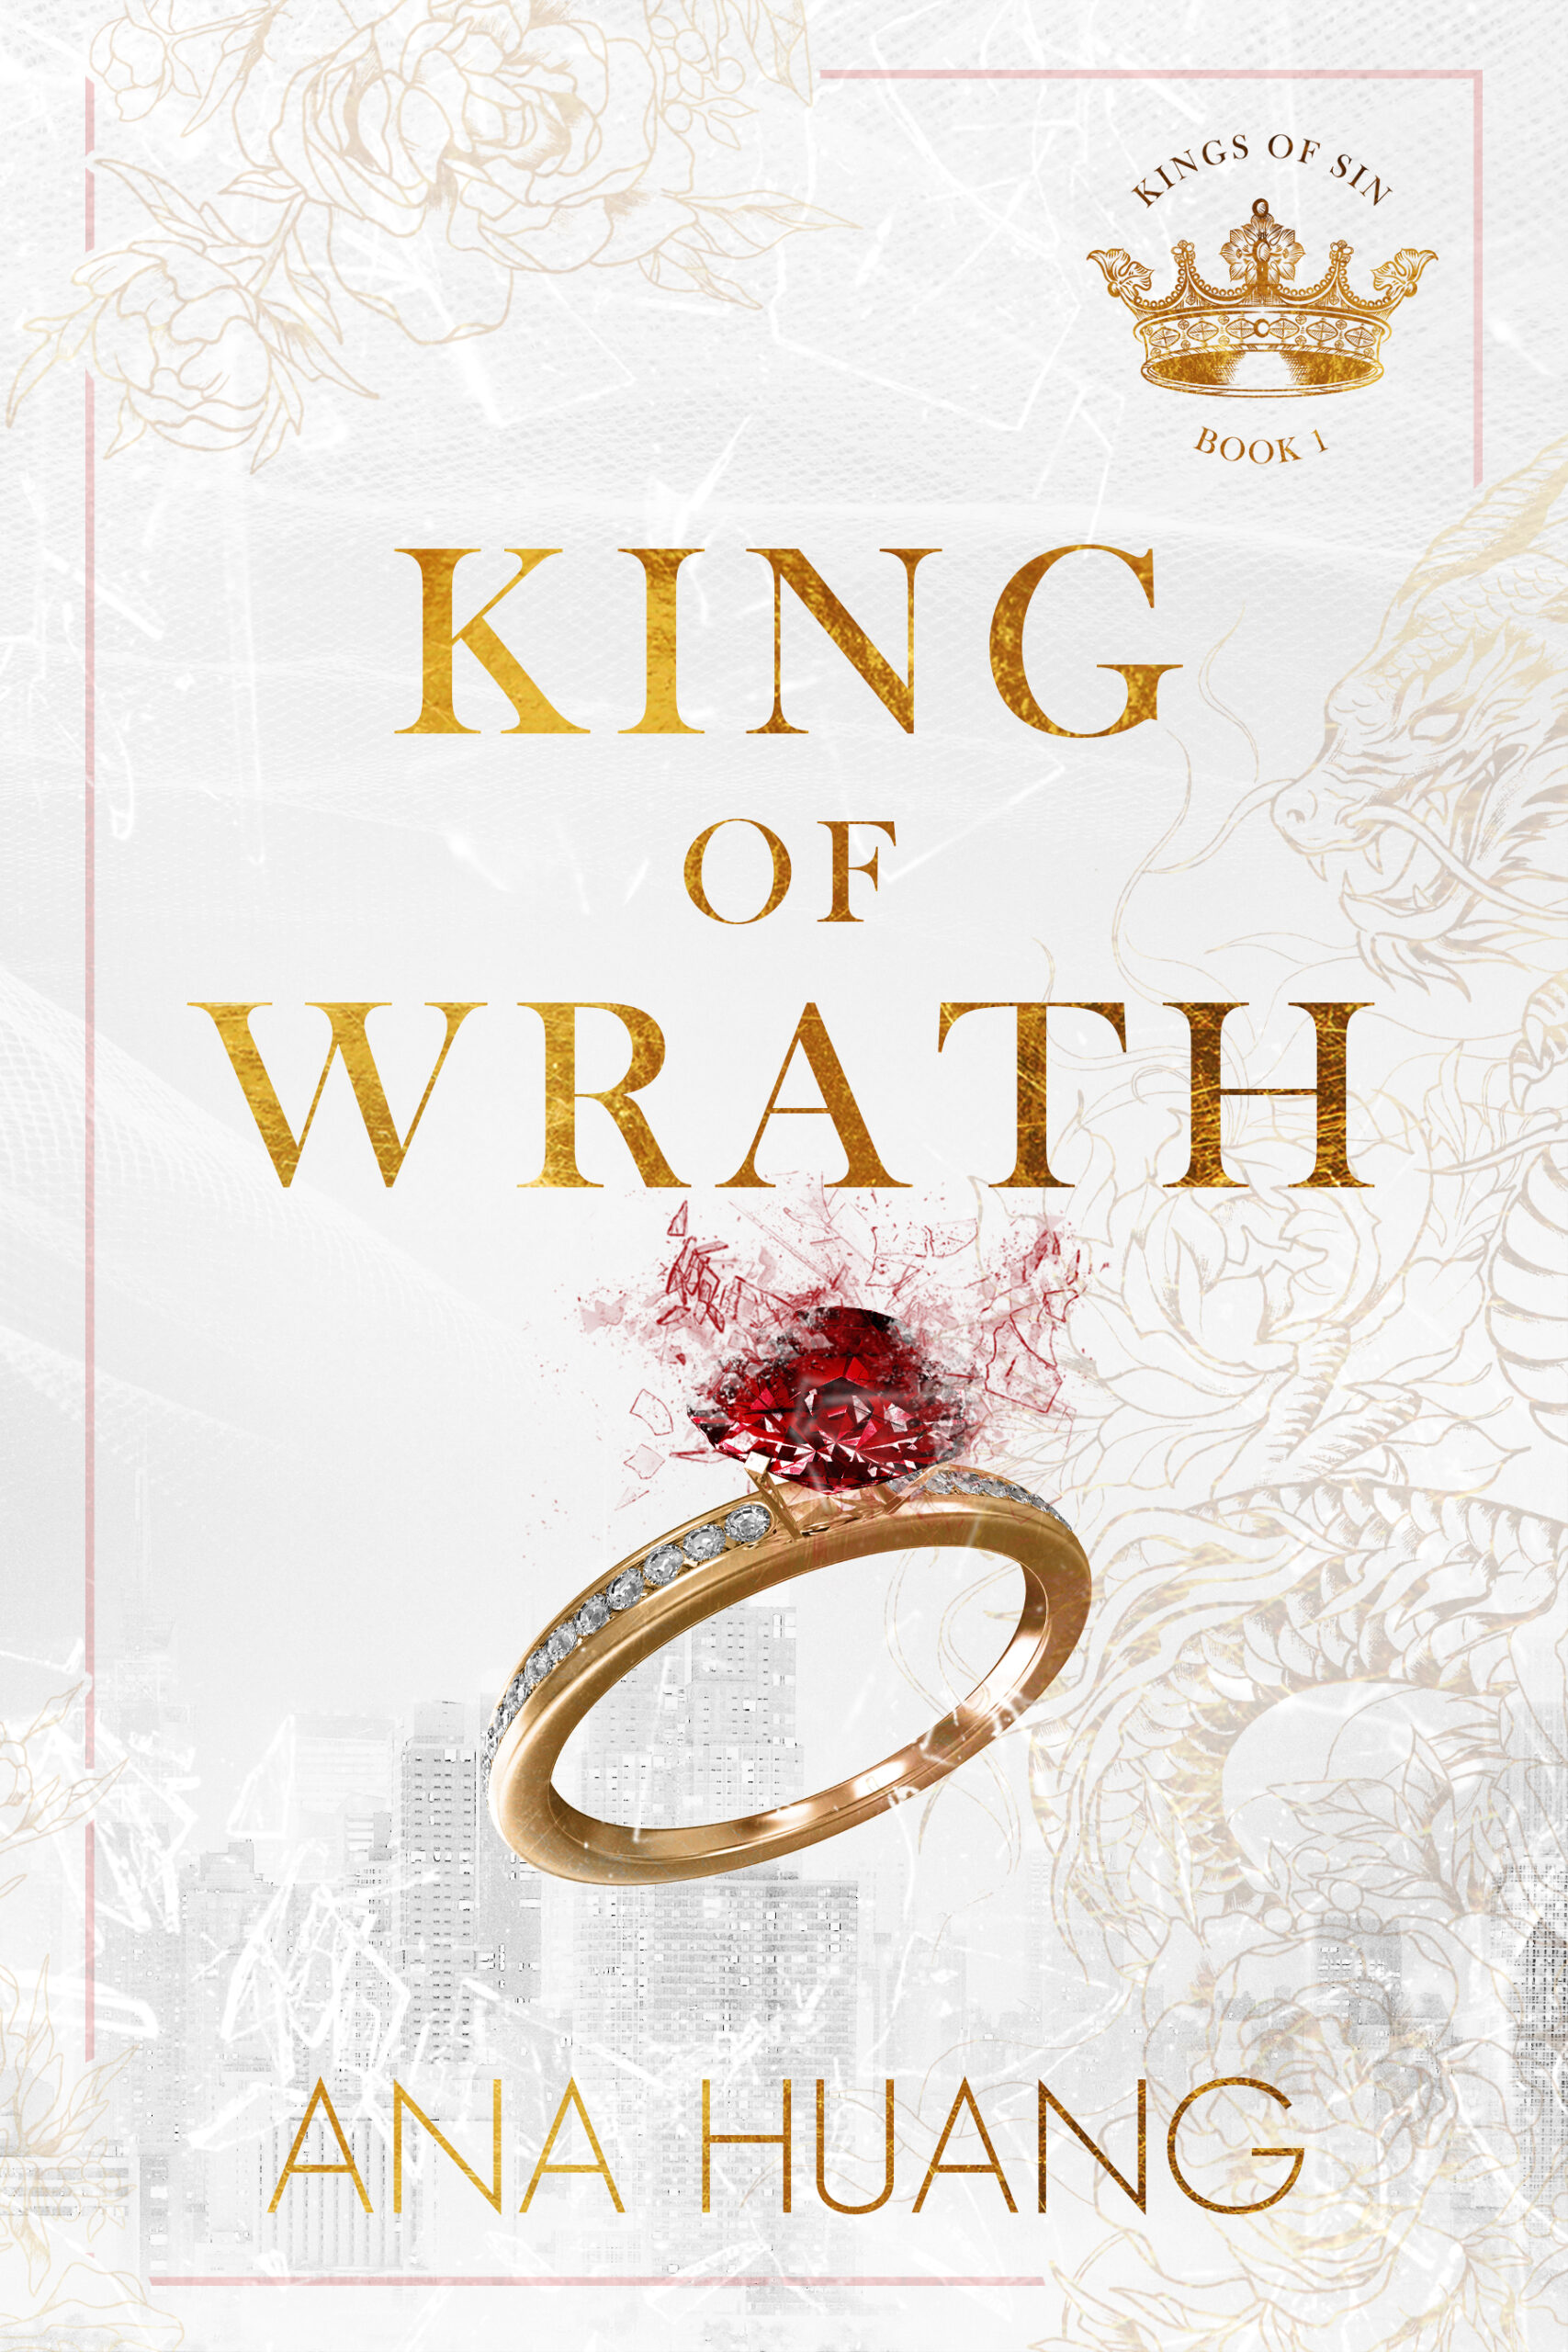 KING OF SIN (Kings of Wrath #1) Alternate Cover – Ana Huang